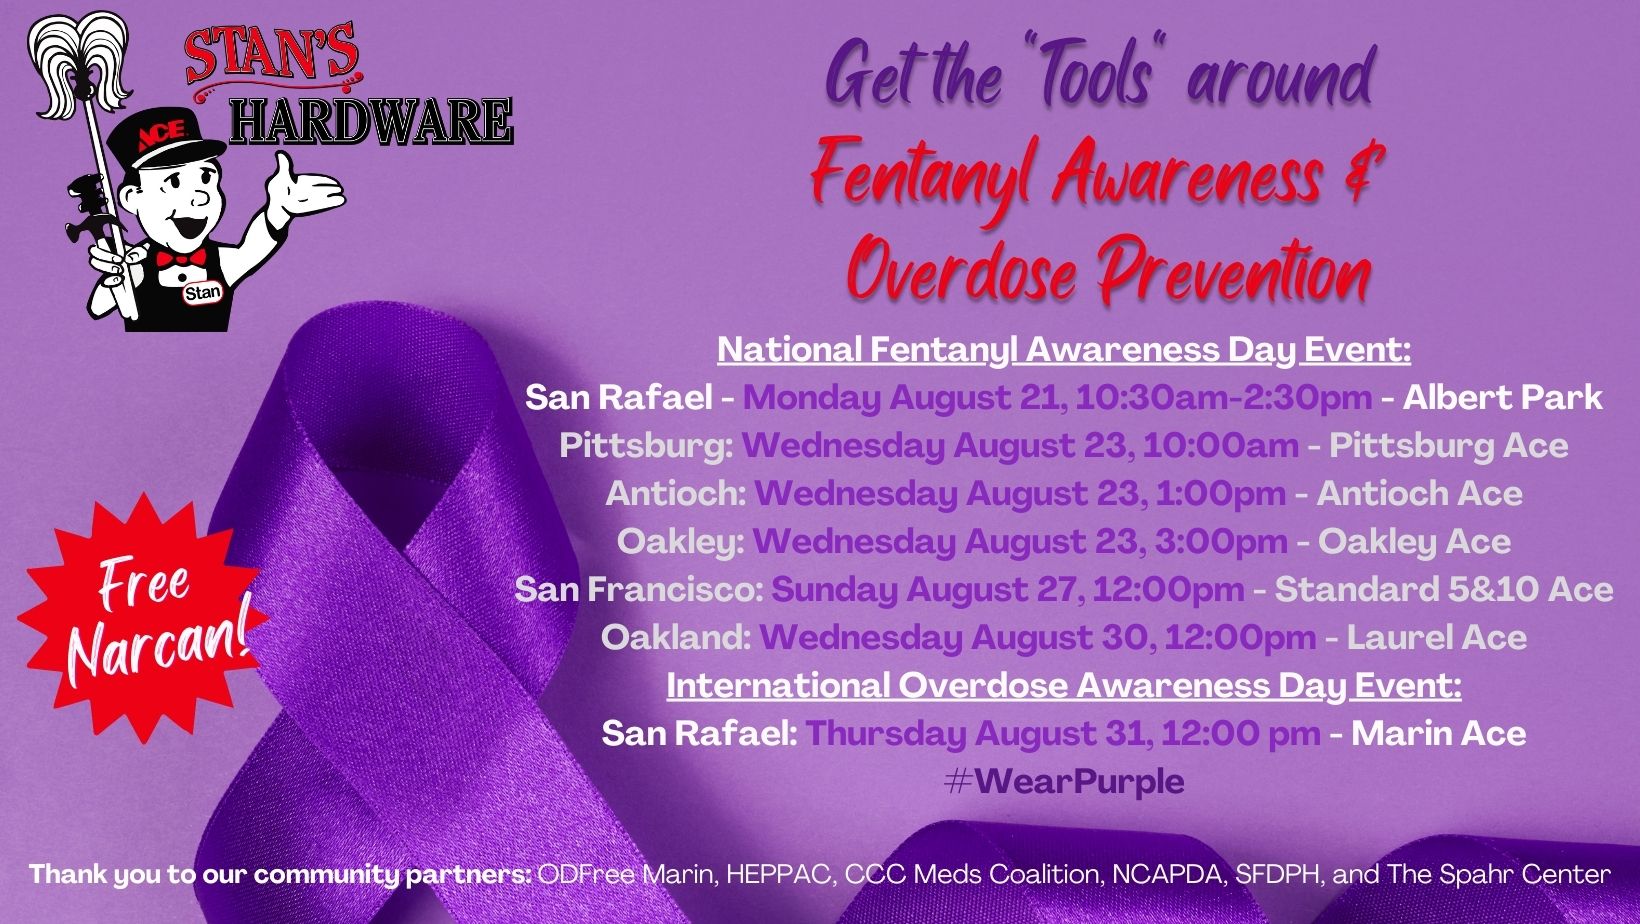 Get the "Tools" of Fentanyl Awareness and Overdose Prevention in August